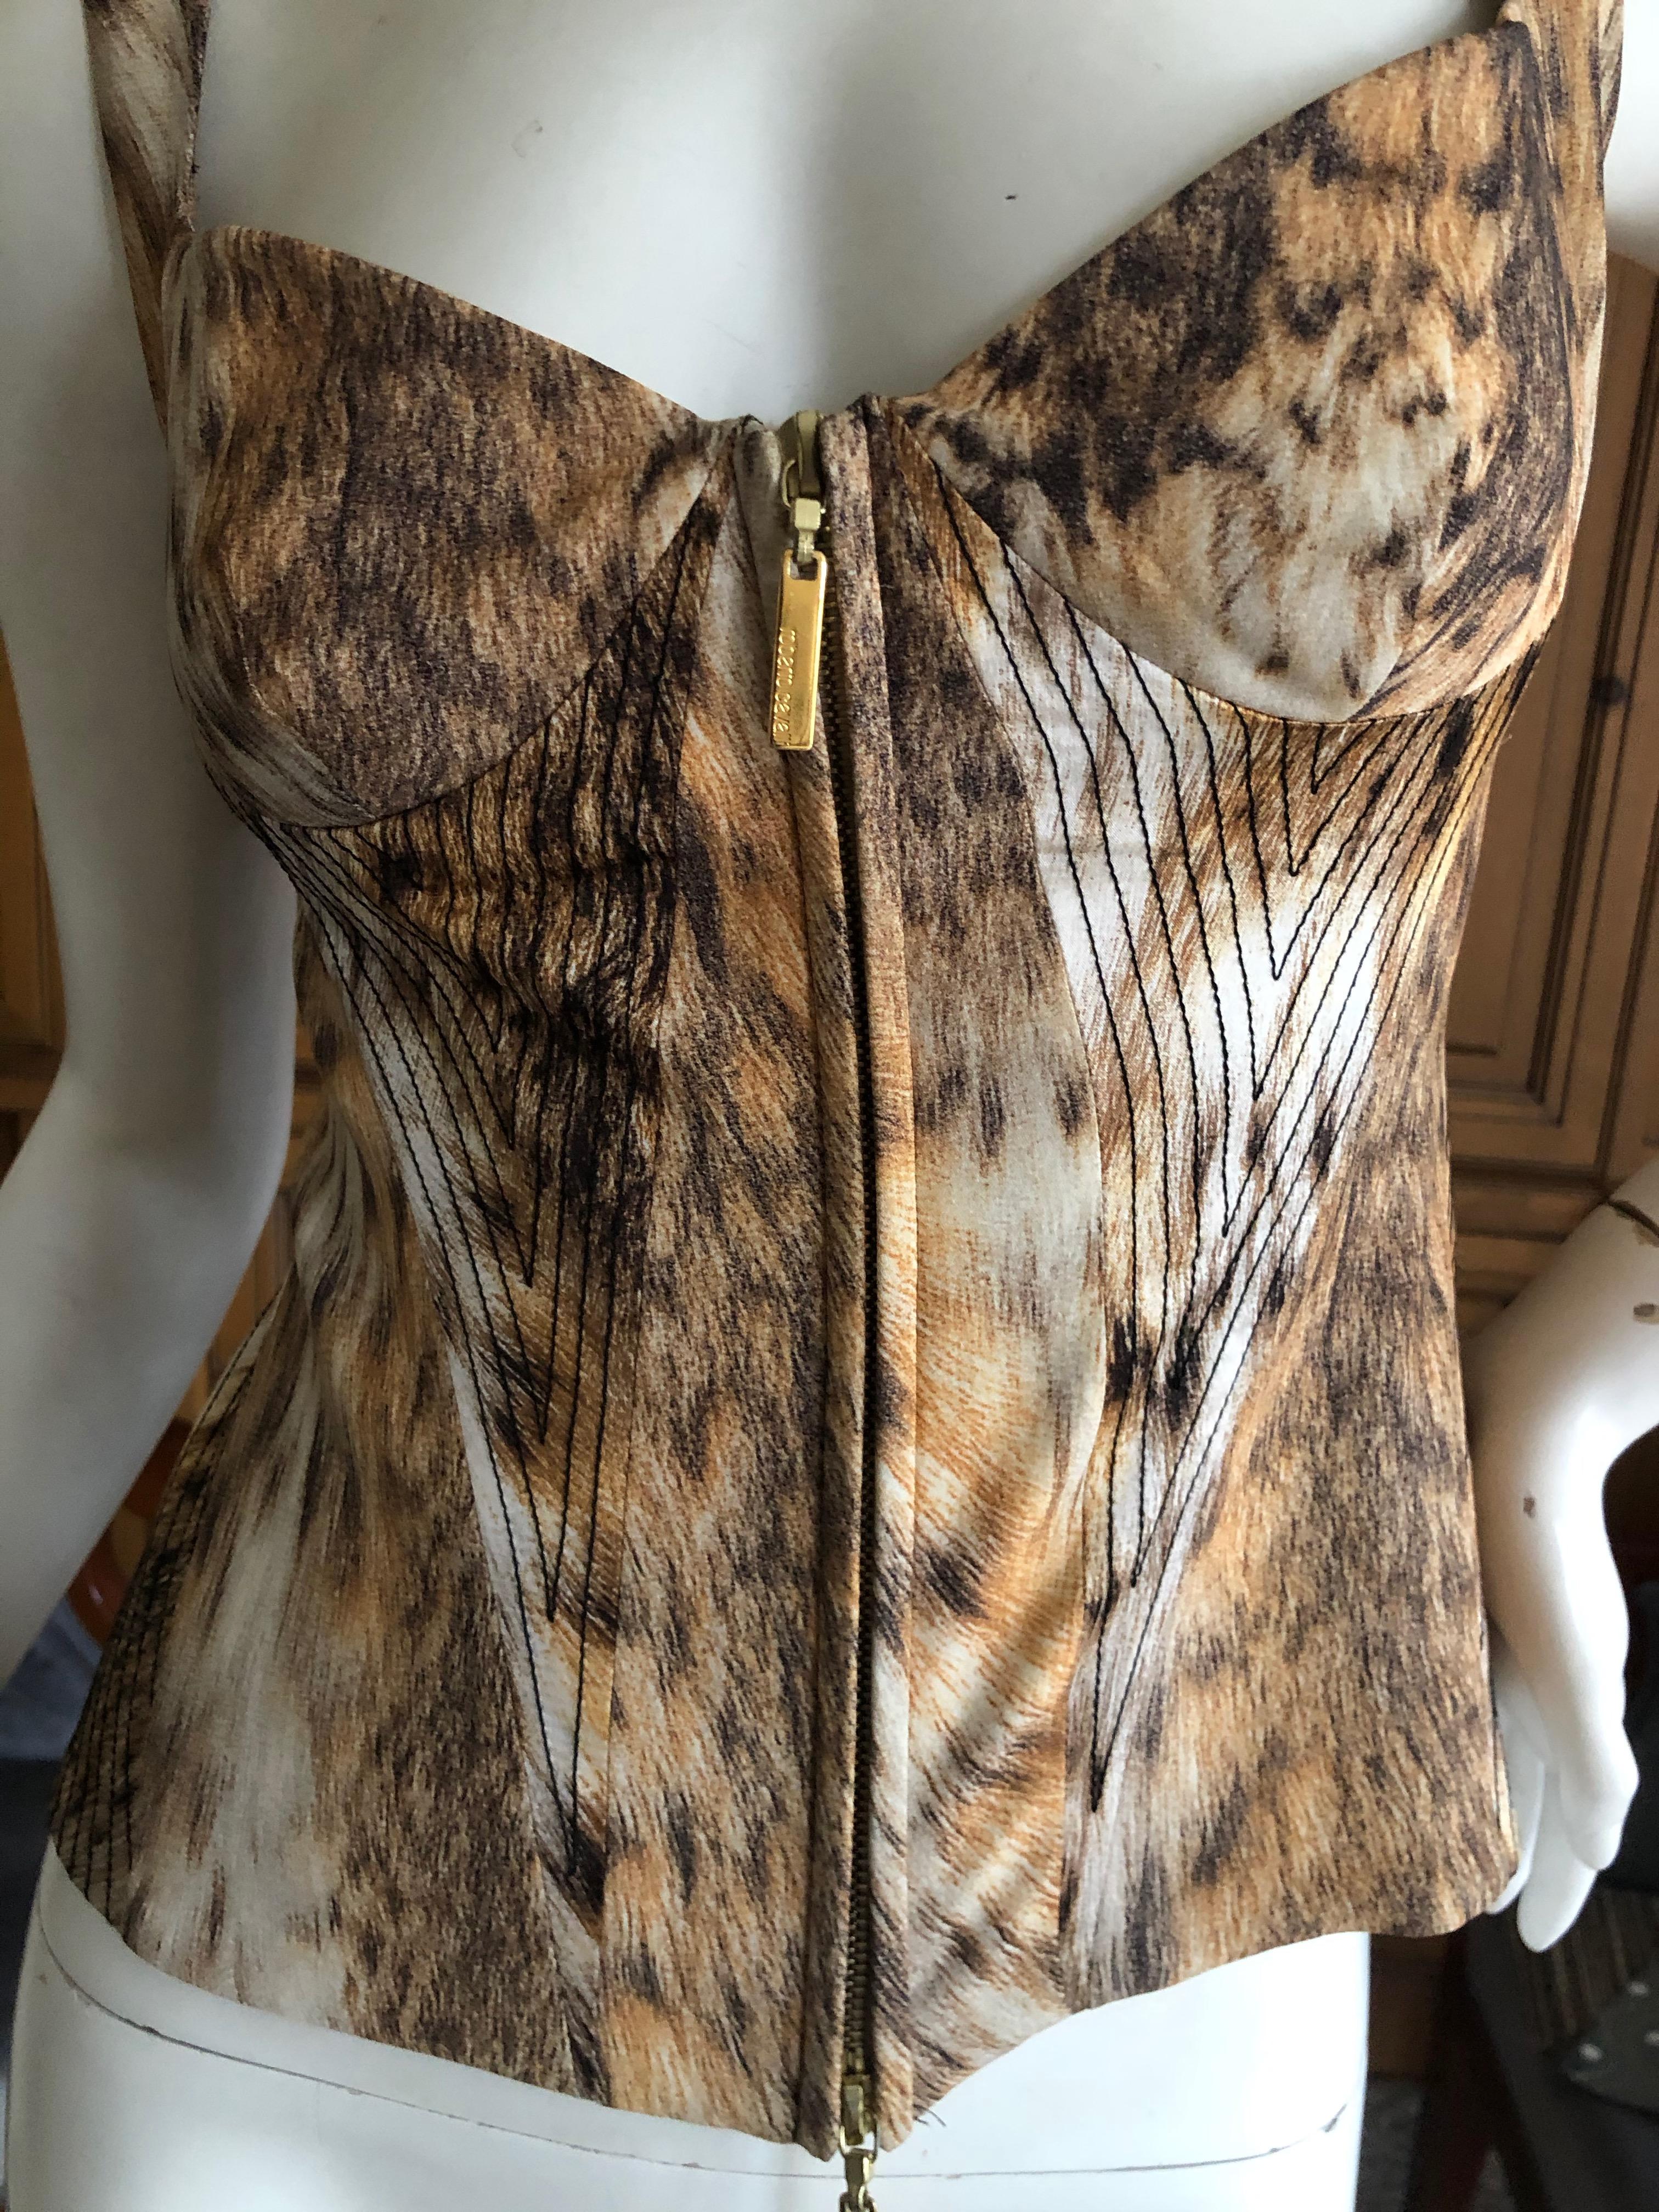 Roberto Cavalli Vintage Leopard Print Corset Bustier with Lace Up Details In Excellent Condition For Sale In Cloverdale, CA